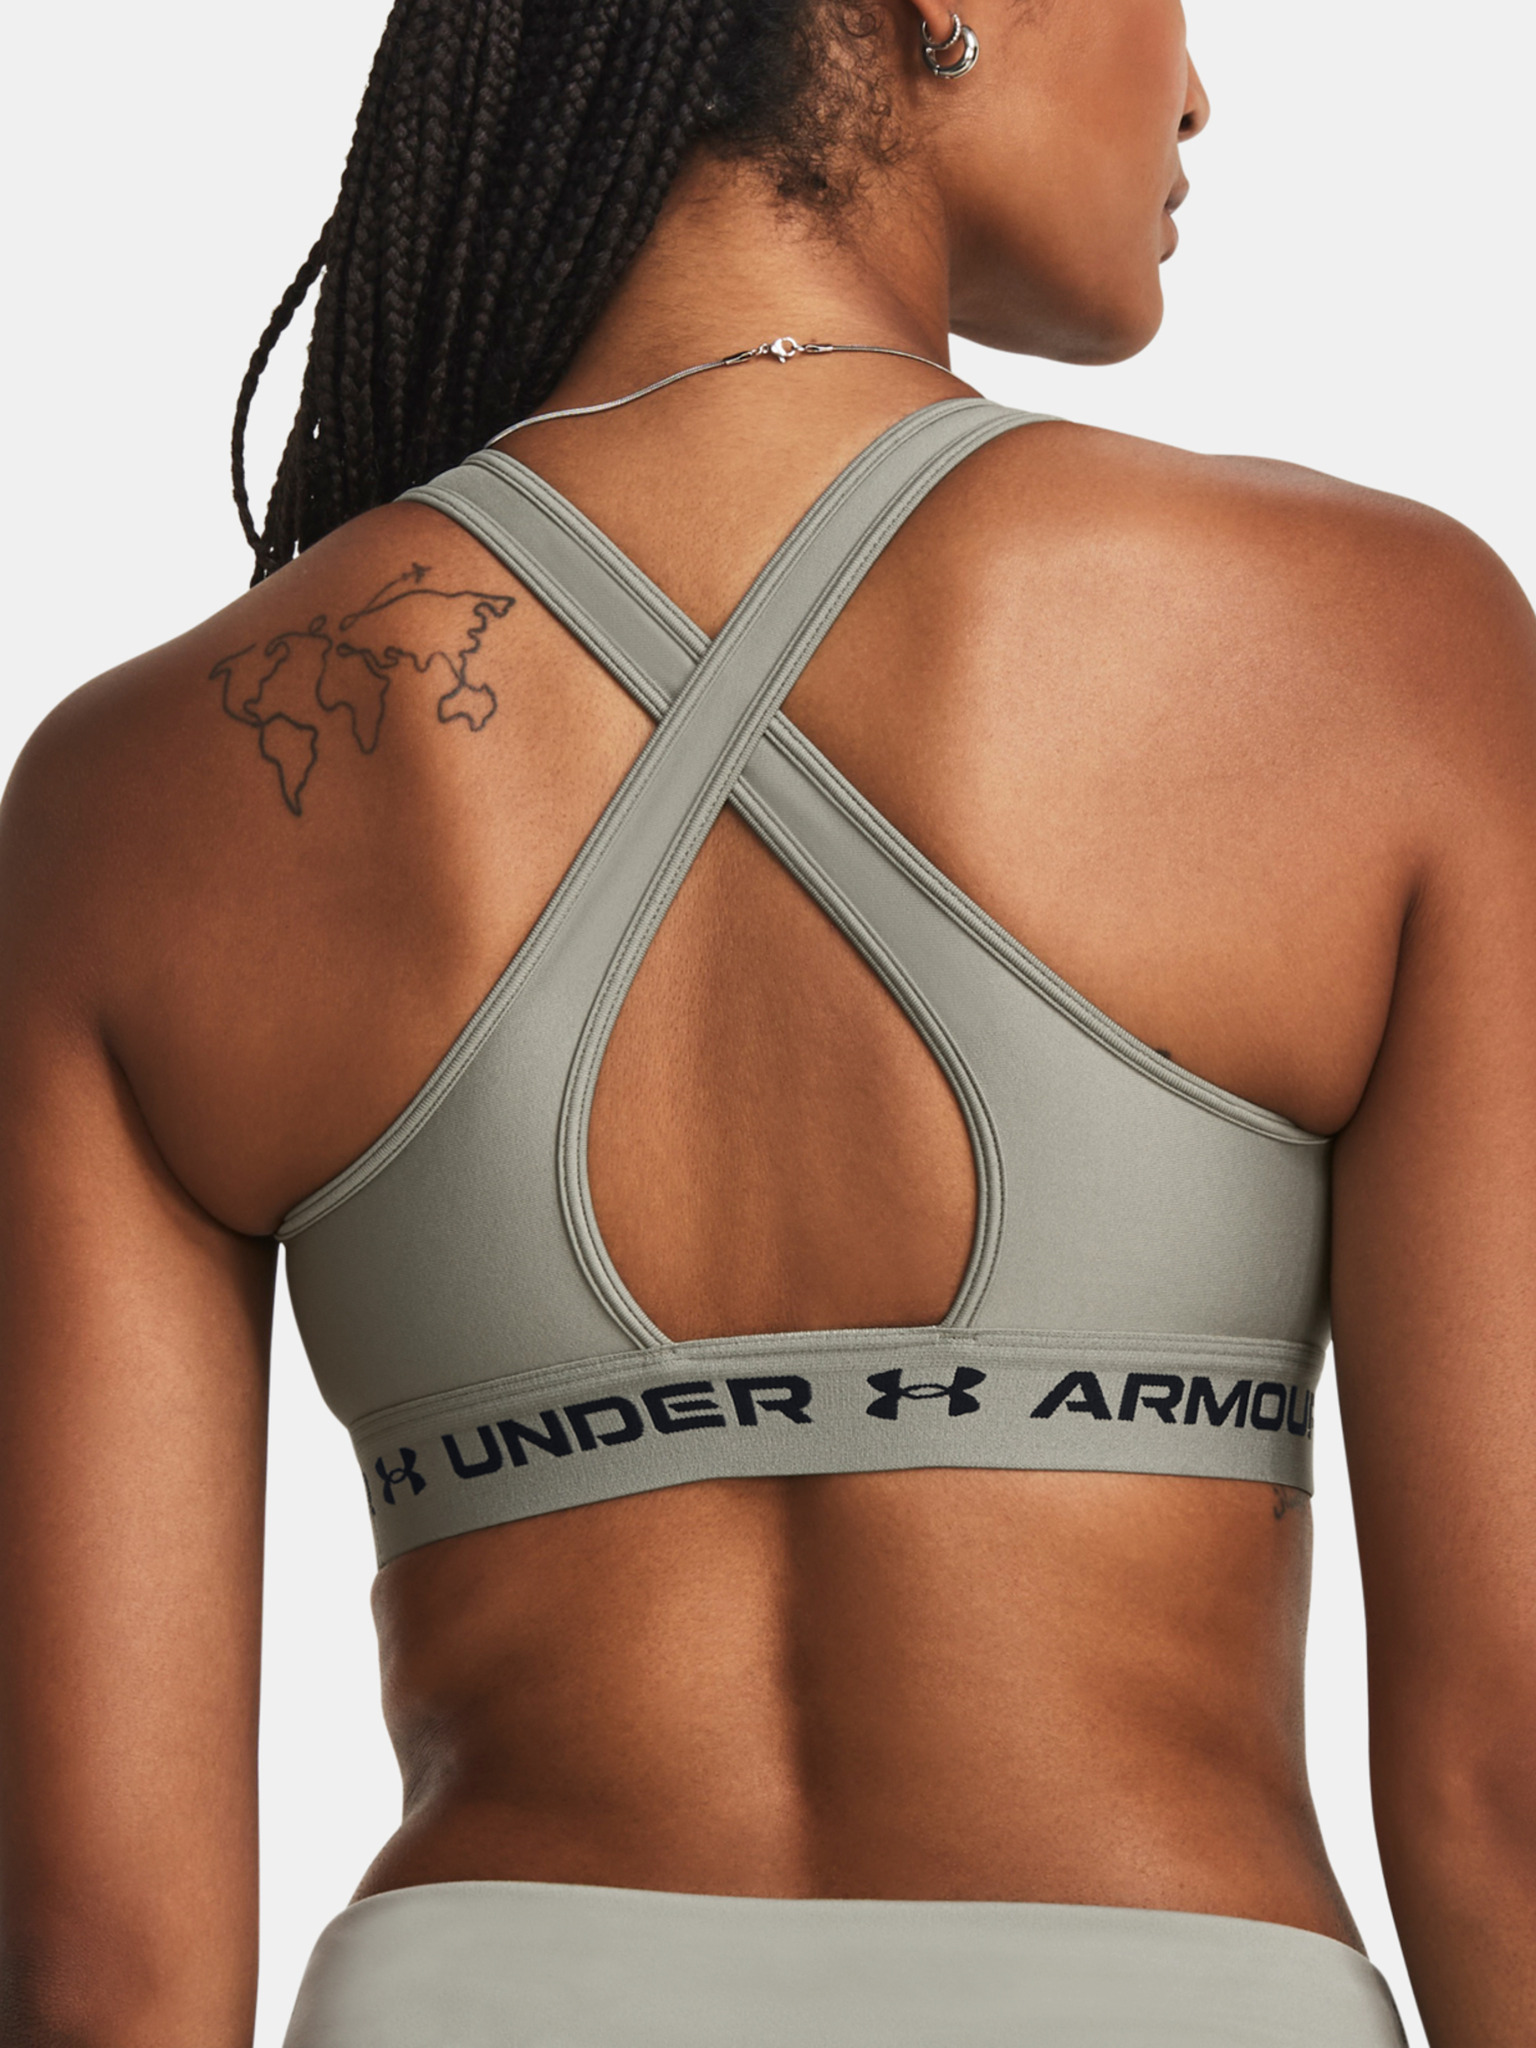 Under Armour Women's UA Mid Crossback Sports Bra 1361034 - Pick Color- New